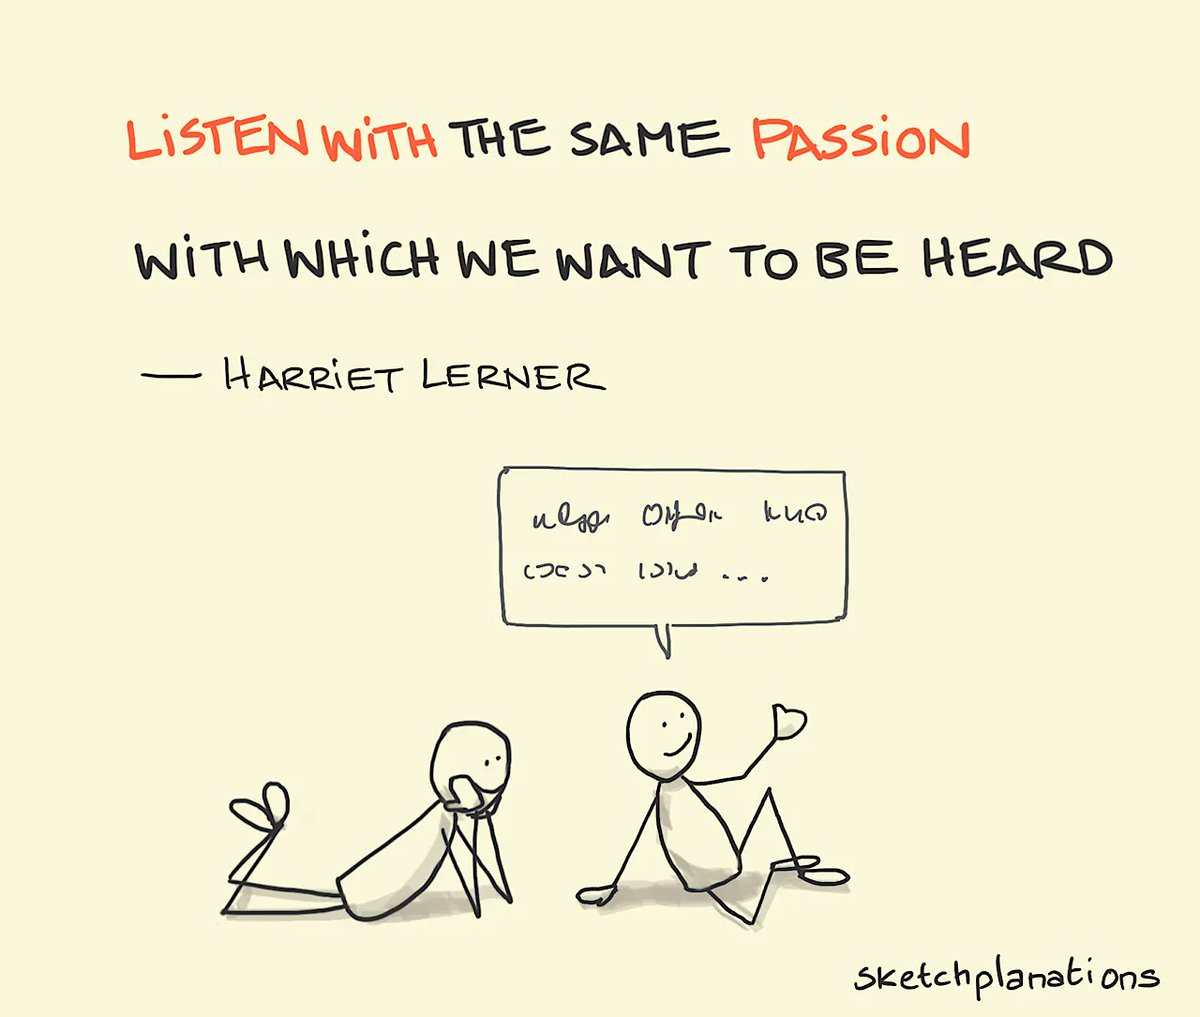 Listen with passion #listen #quote #advice